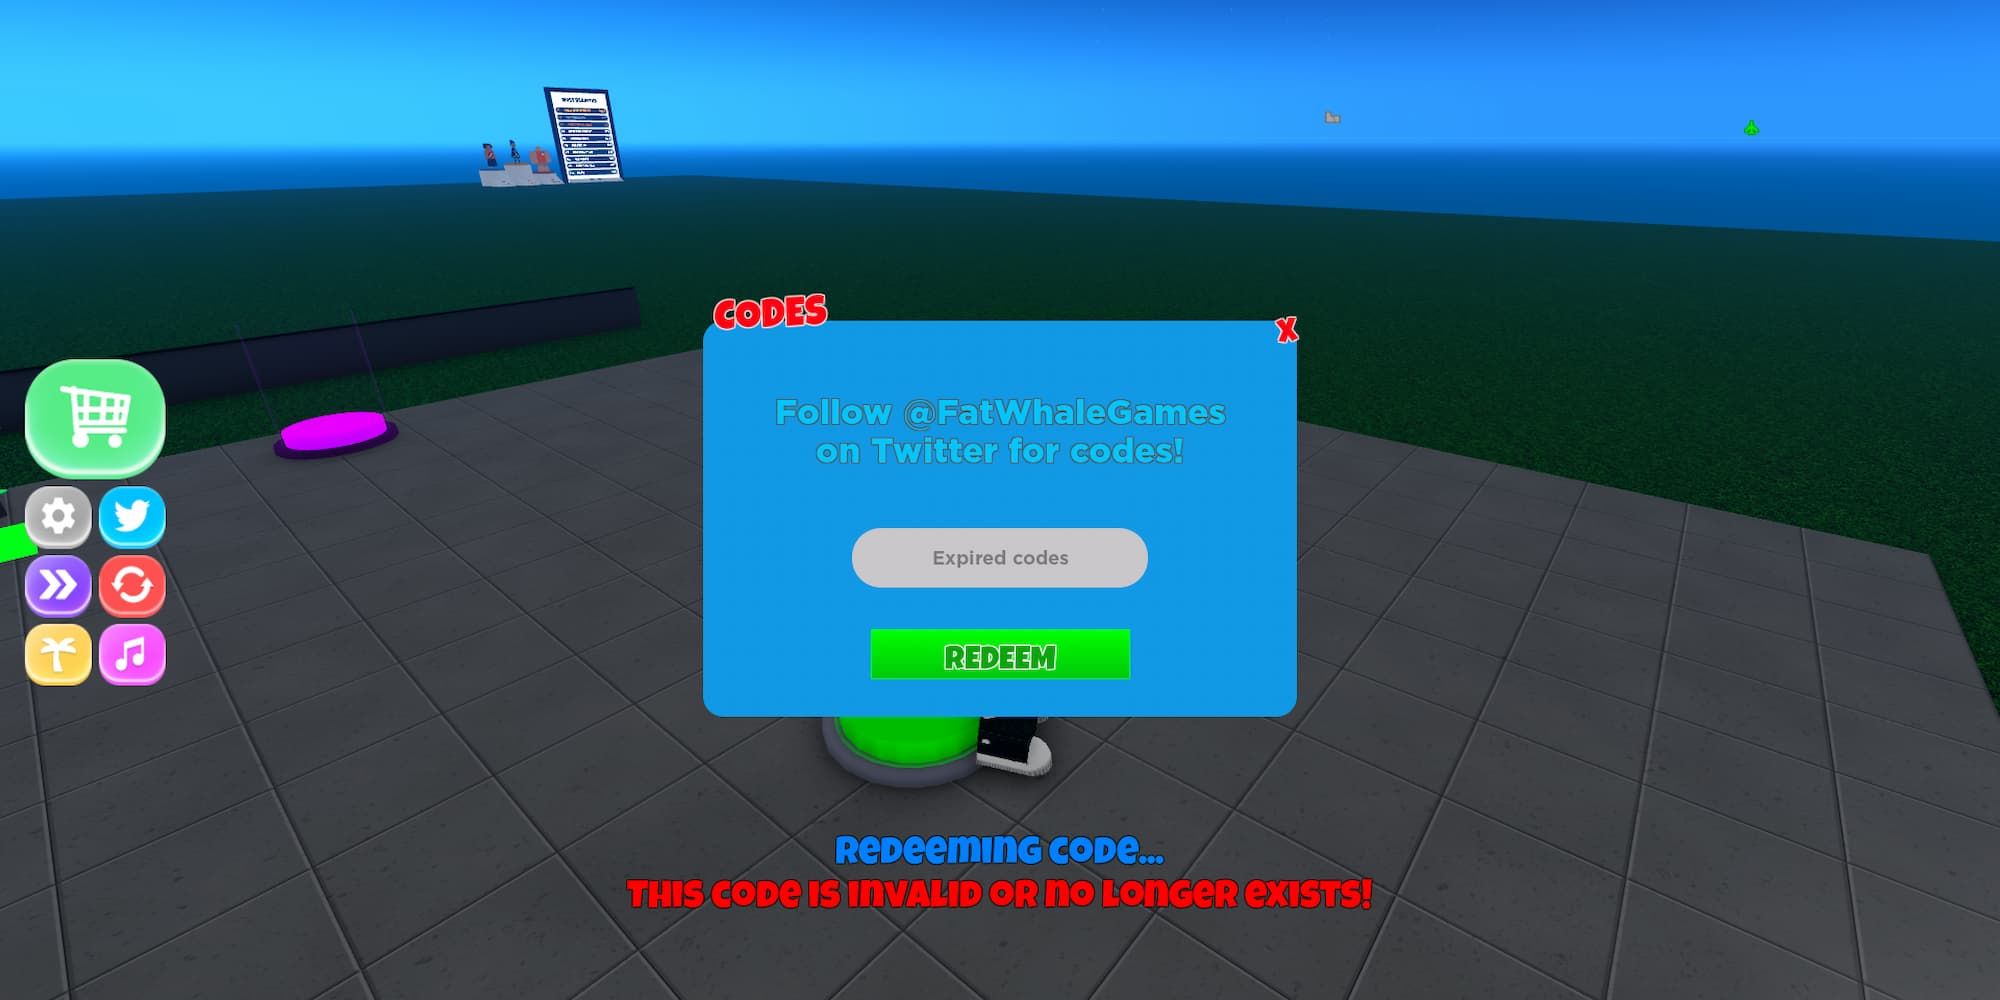 Expired code error message in Roblox: Airport Tycoon